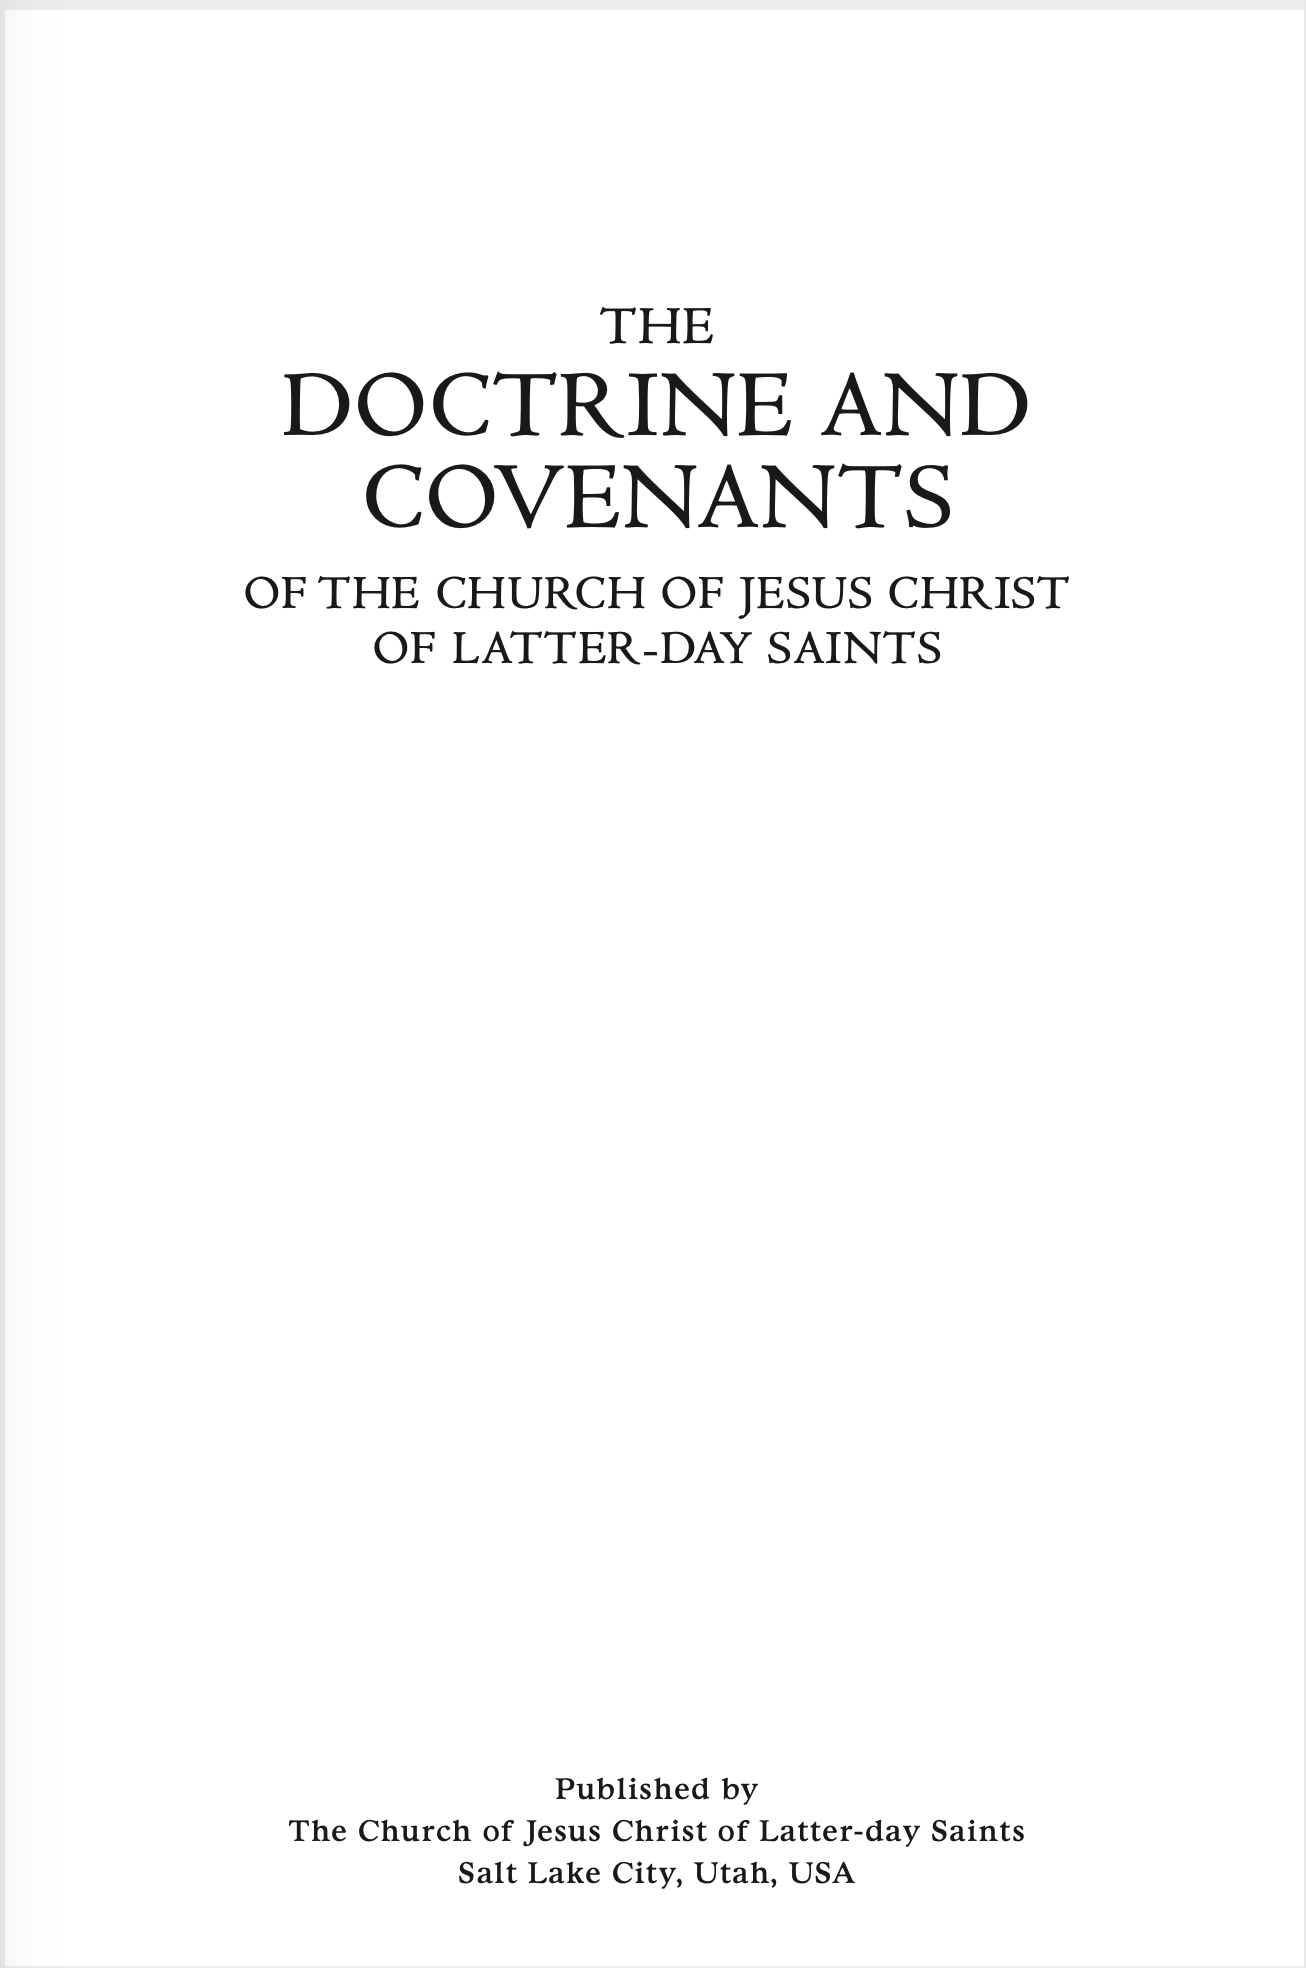 Title Page of Doctrine and Covenants